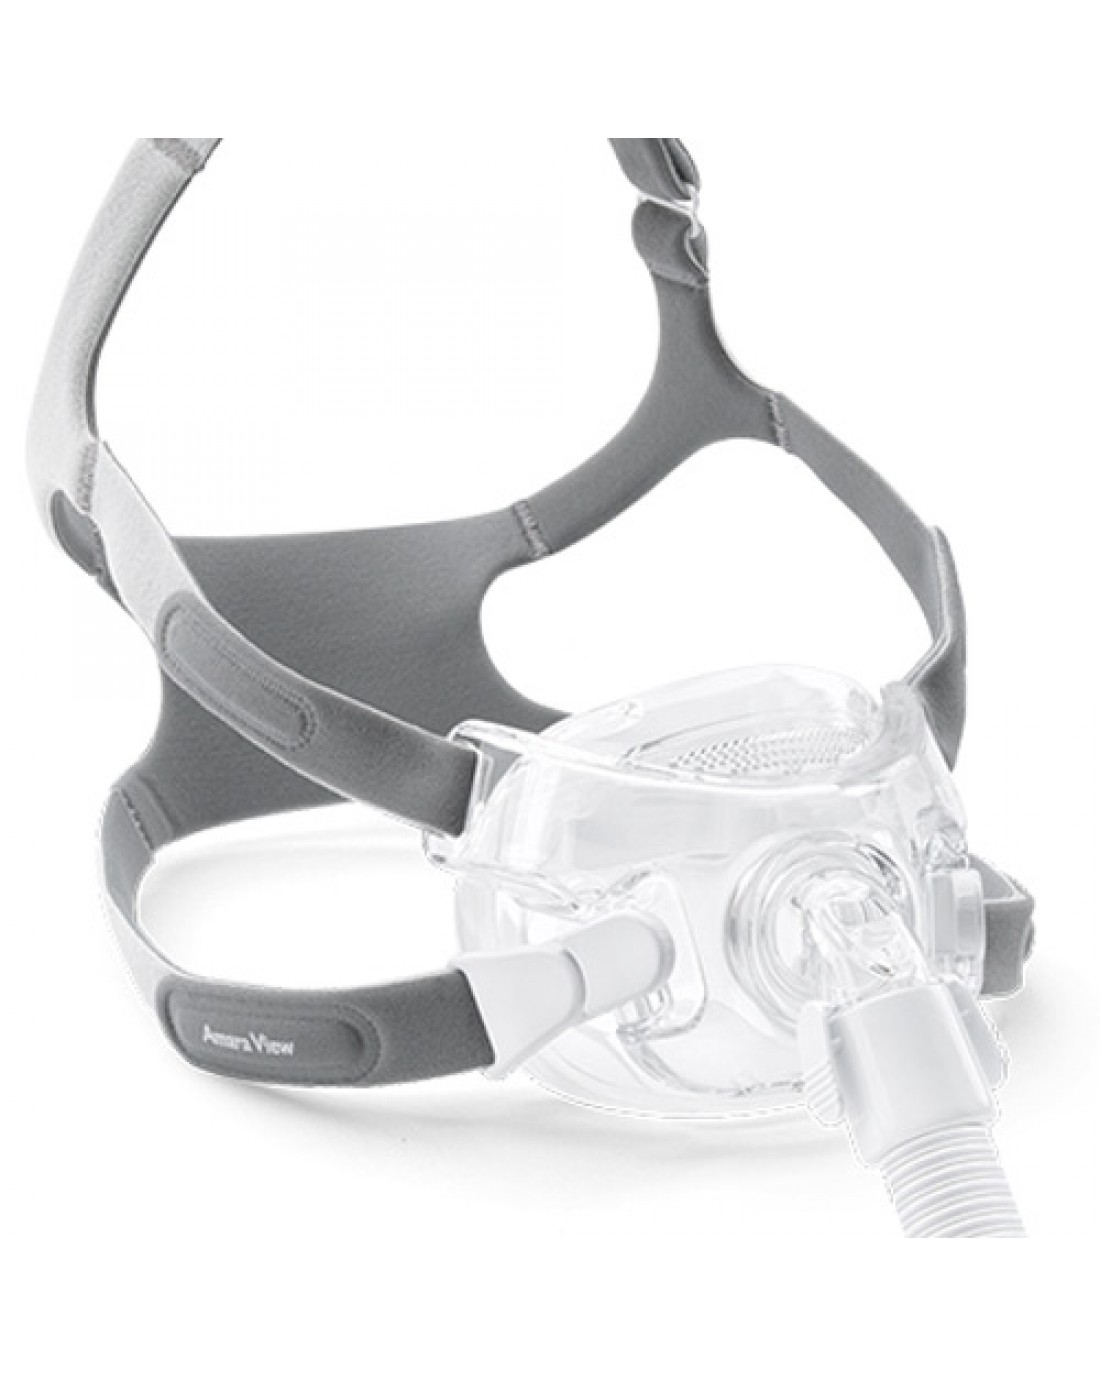 Philips Respironics Amara View Full Face Cpap Mask With 5835